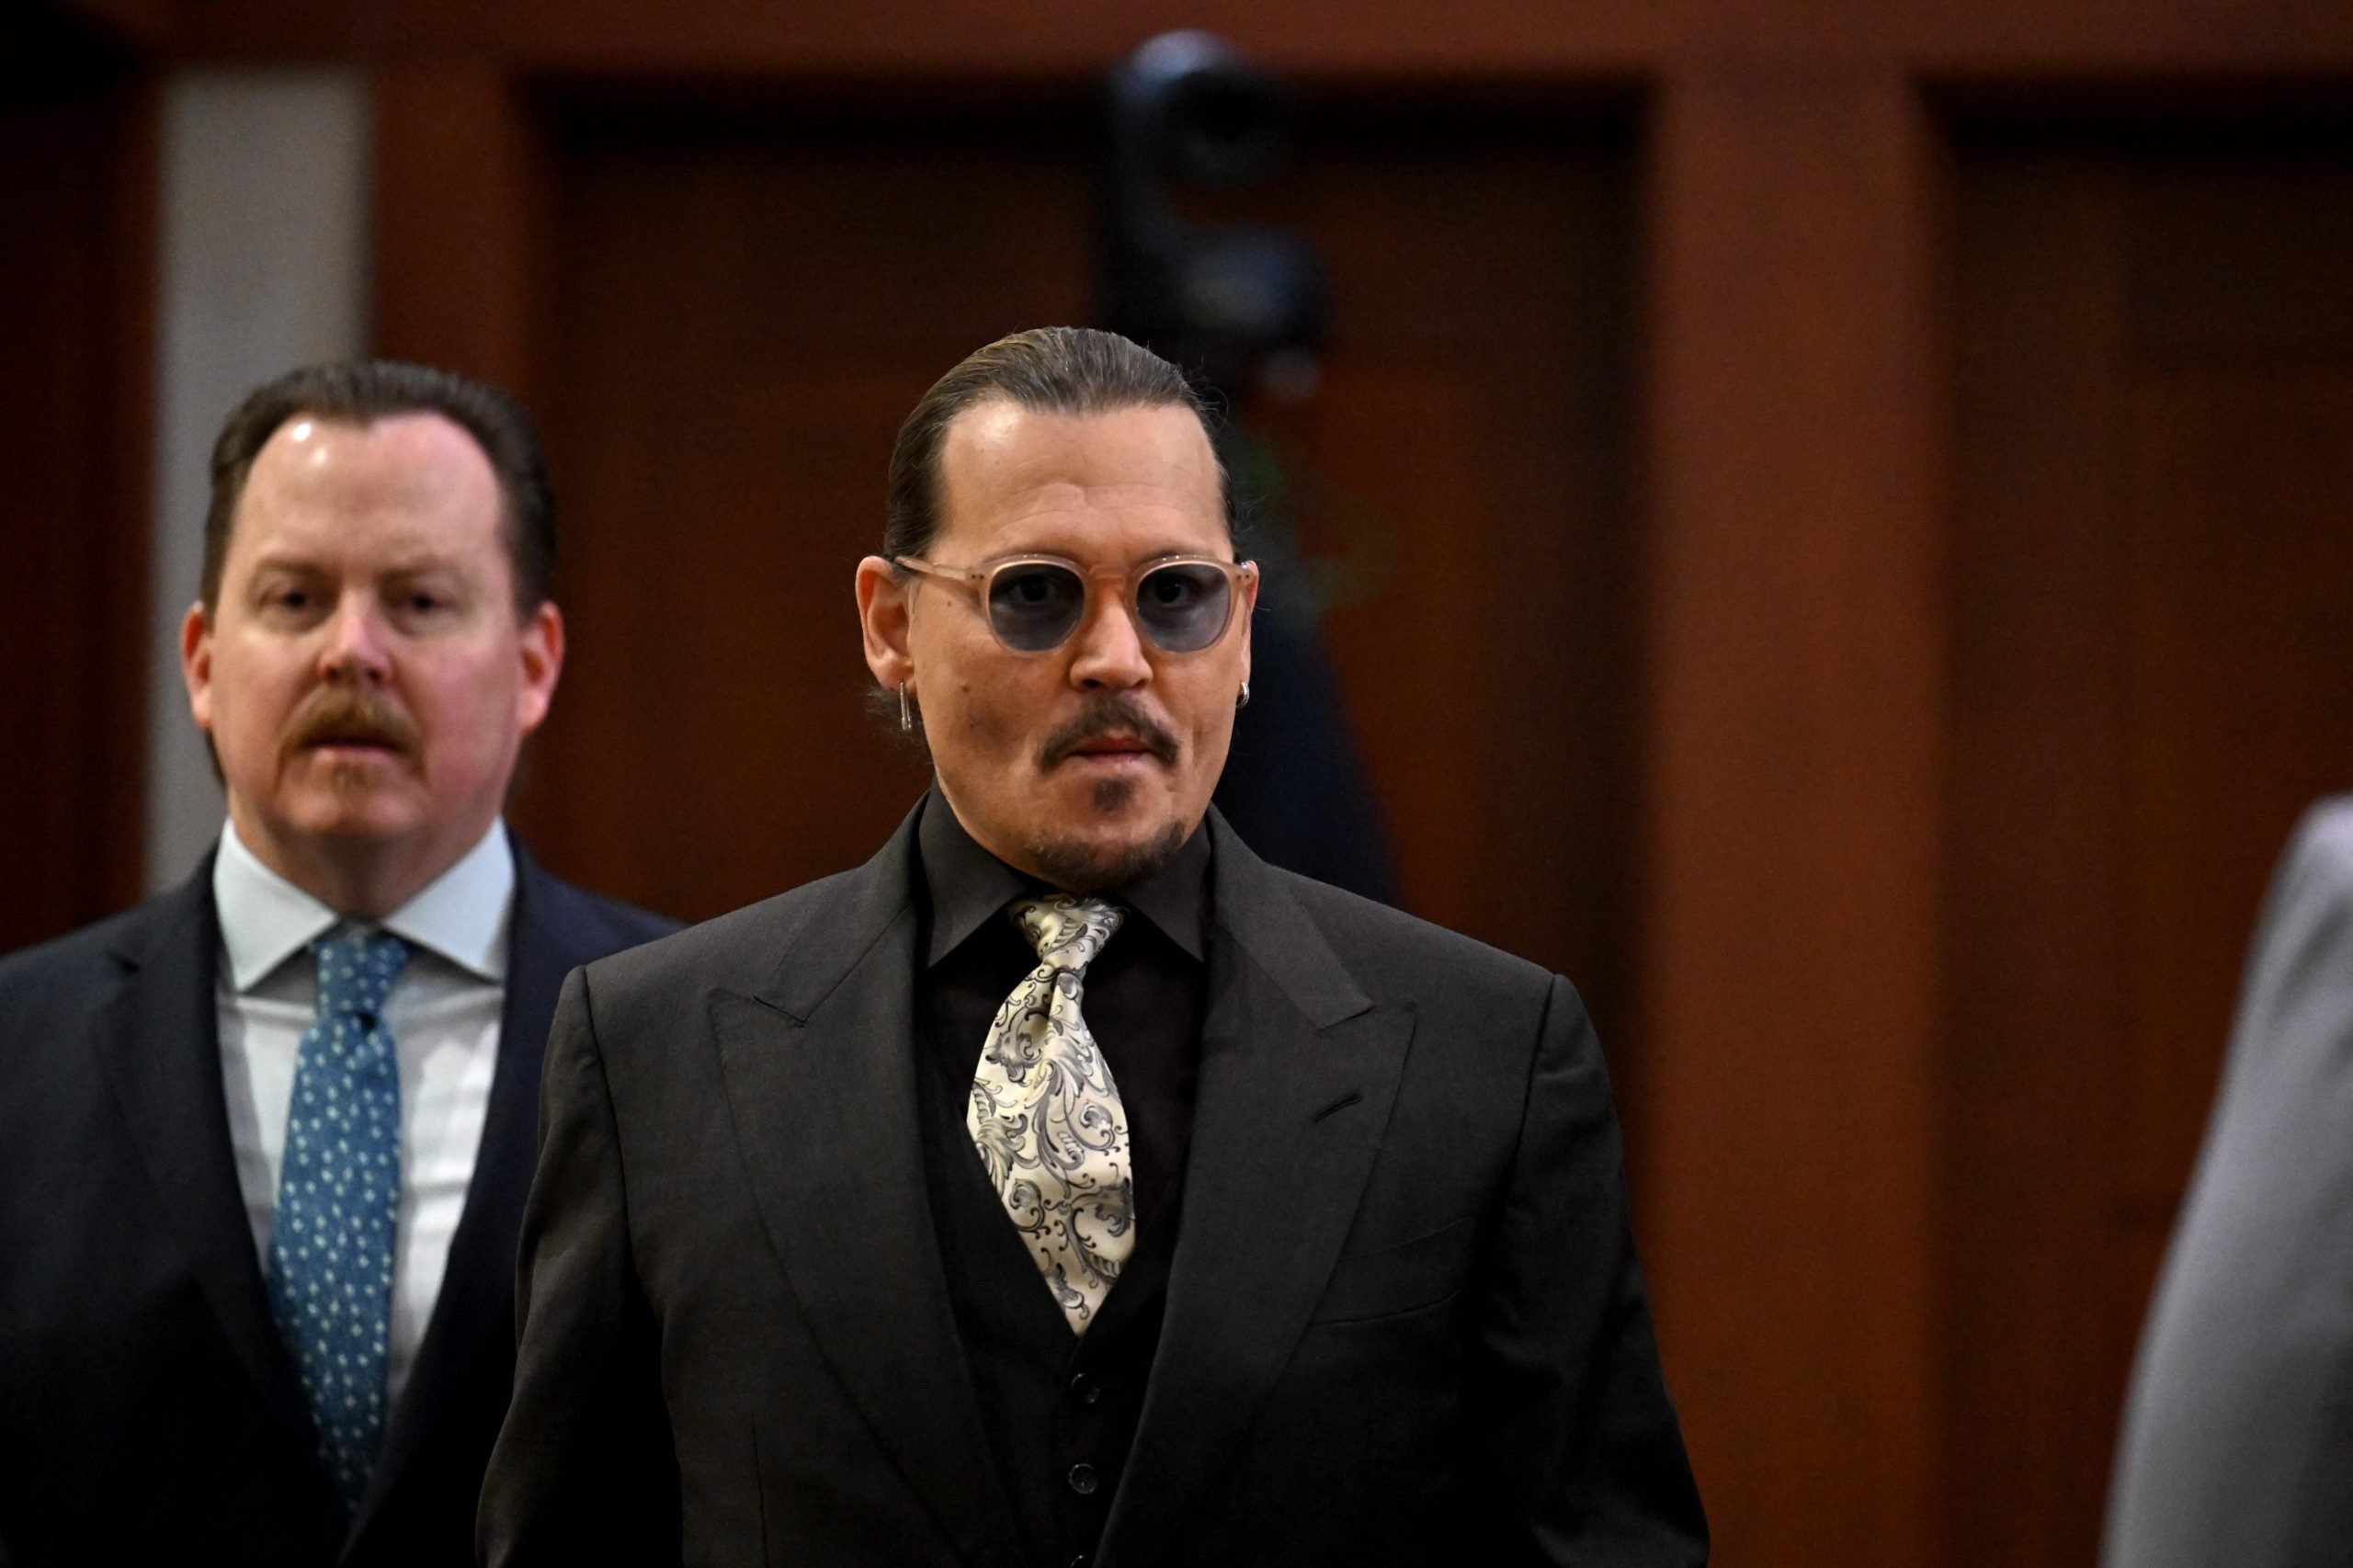 US actor Johnny Depp arrives at the Fairfax County Circuit Courthouse in Fairfax, Virginia, on April 19, 2022. - Depp is suing ex-wife Amber Heard for libel after she wrote an op-ed piece in The Washington Post in 2018 referring to herself as a public figure representing domestic abuse.